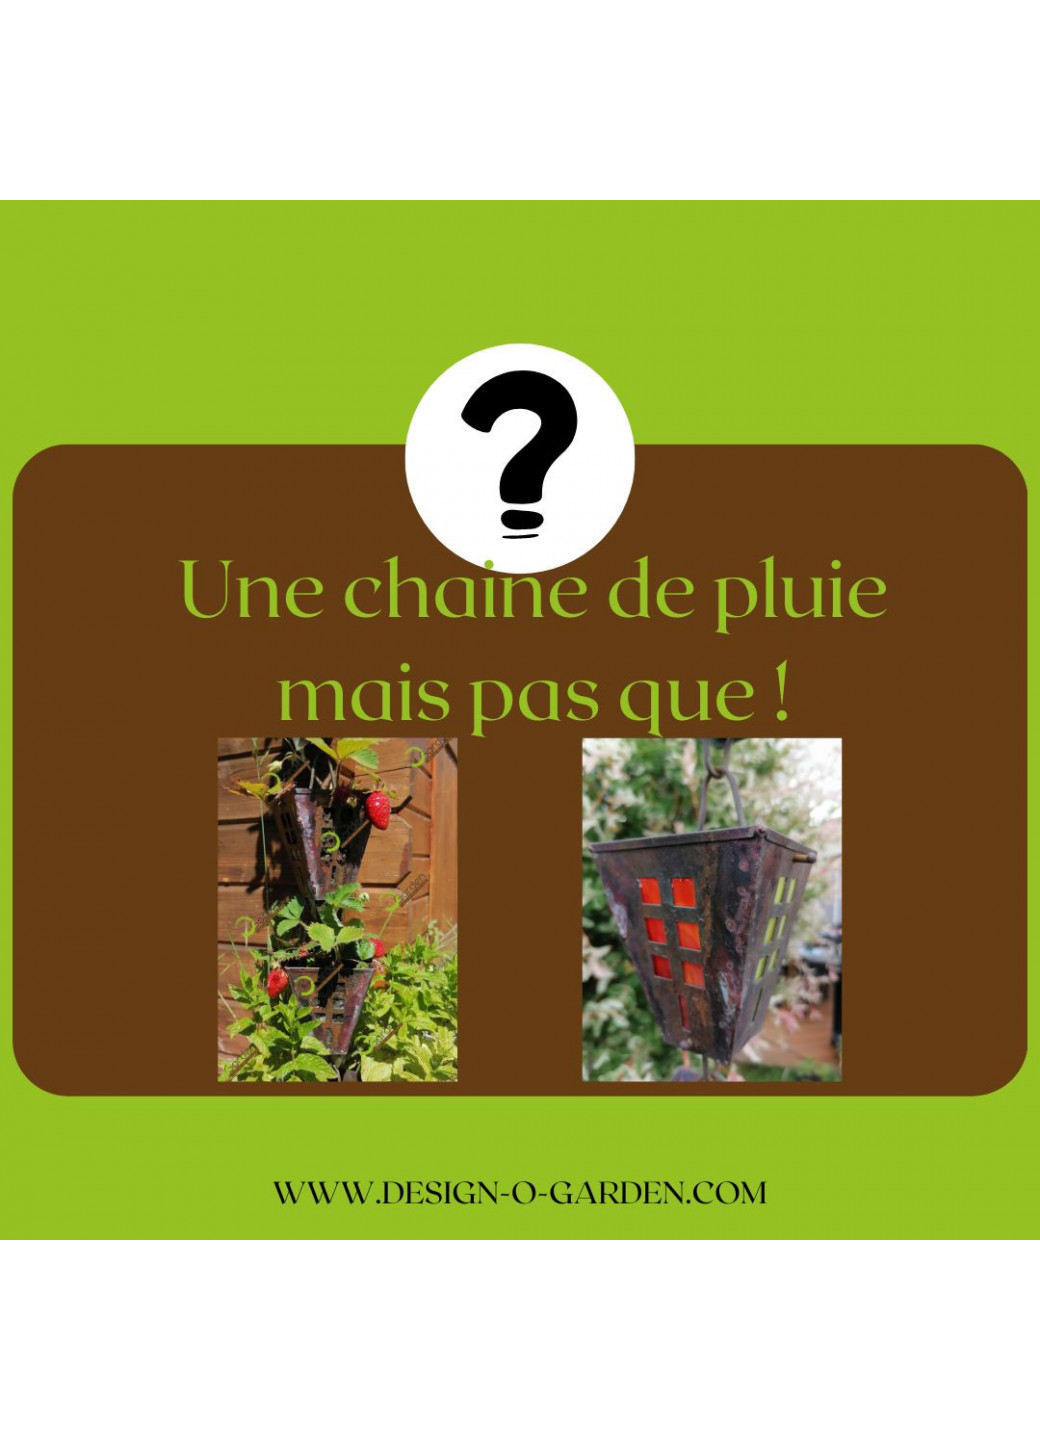 Discover other ways to use a rain chain